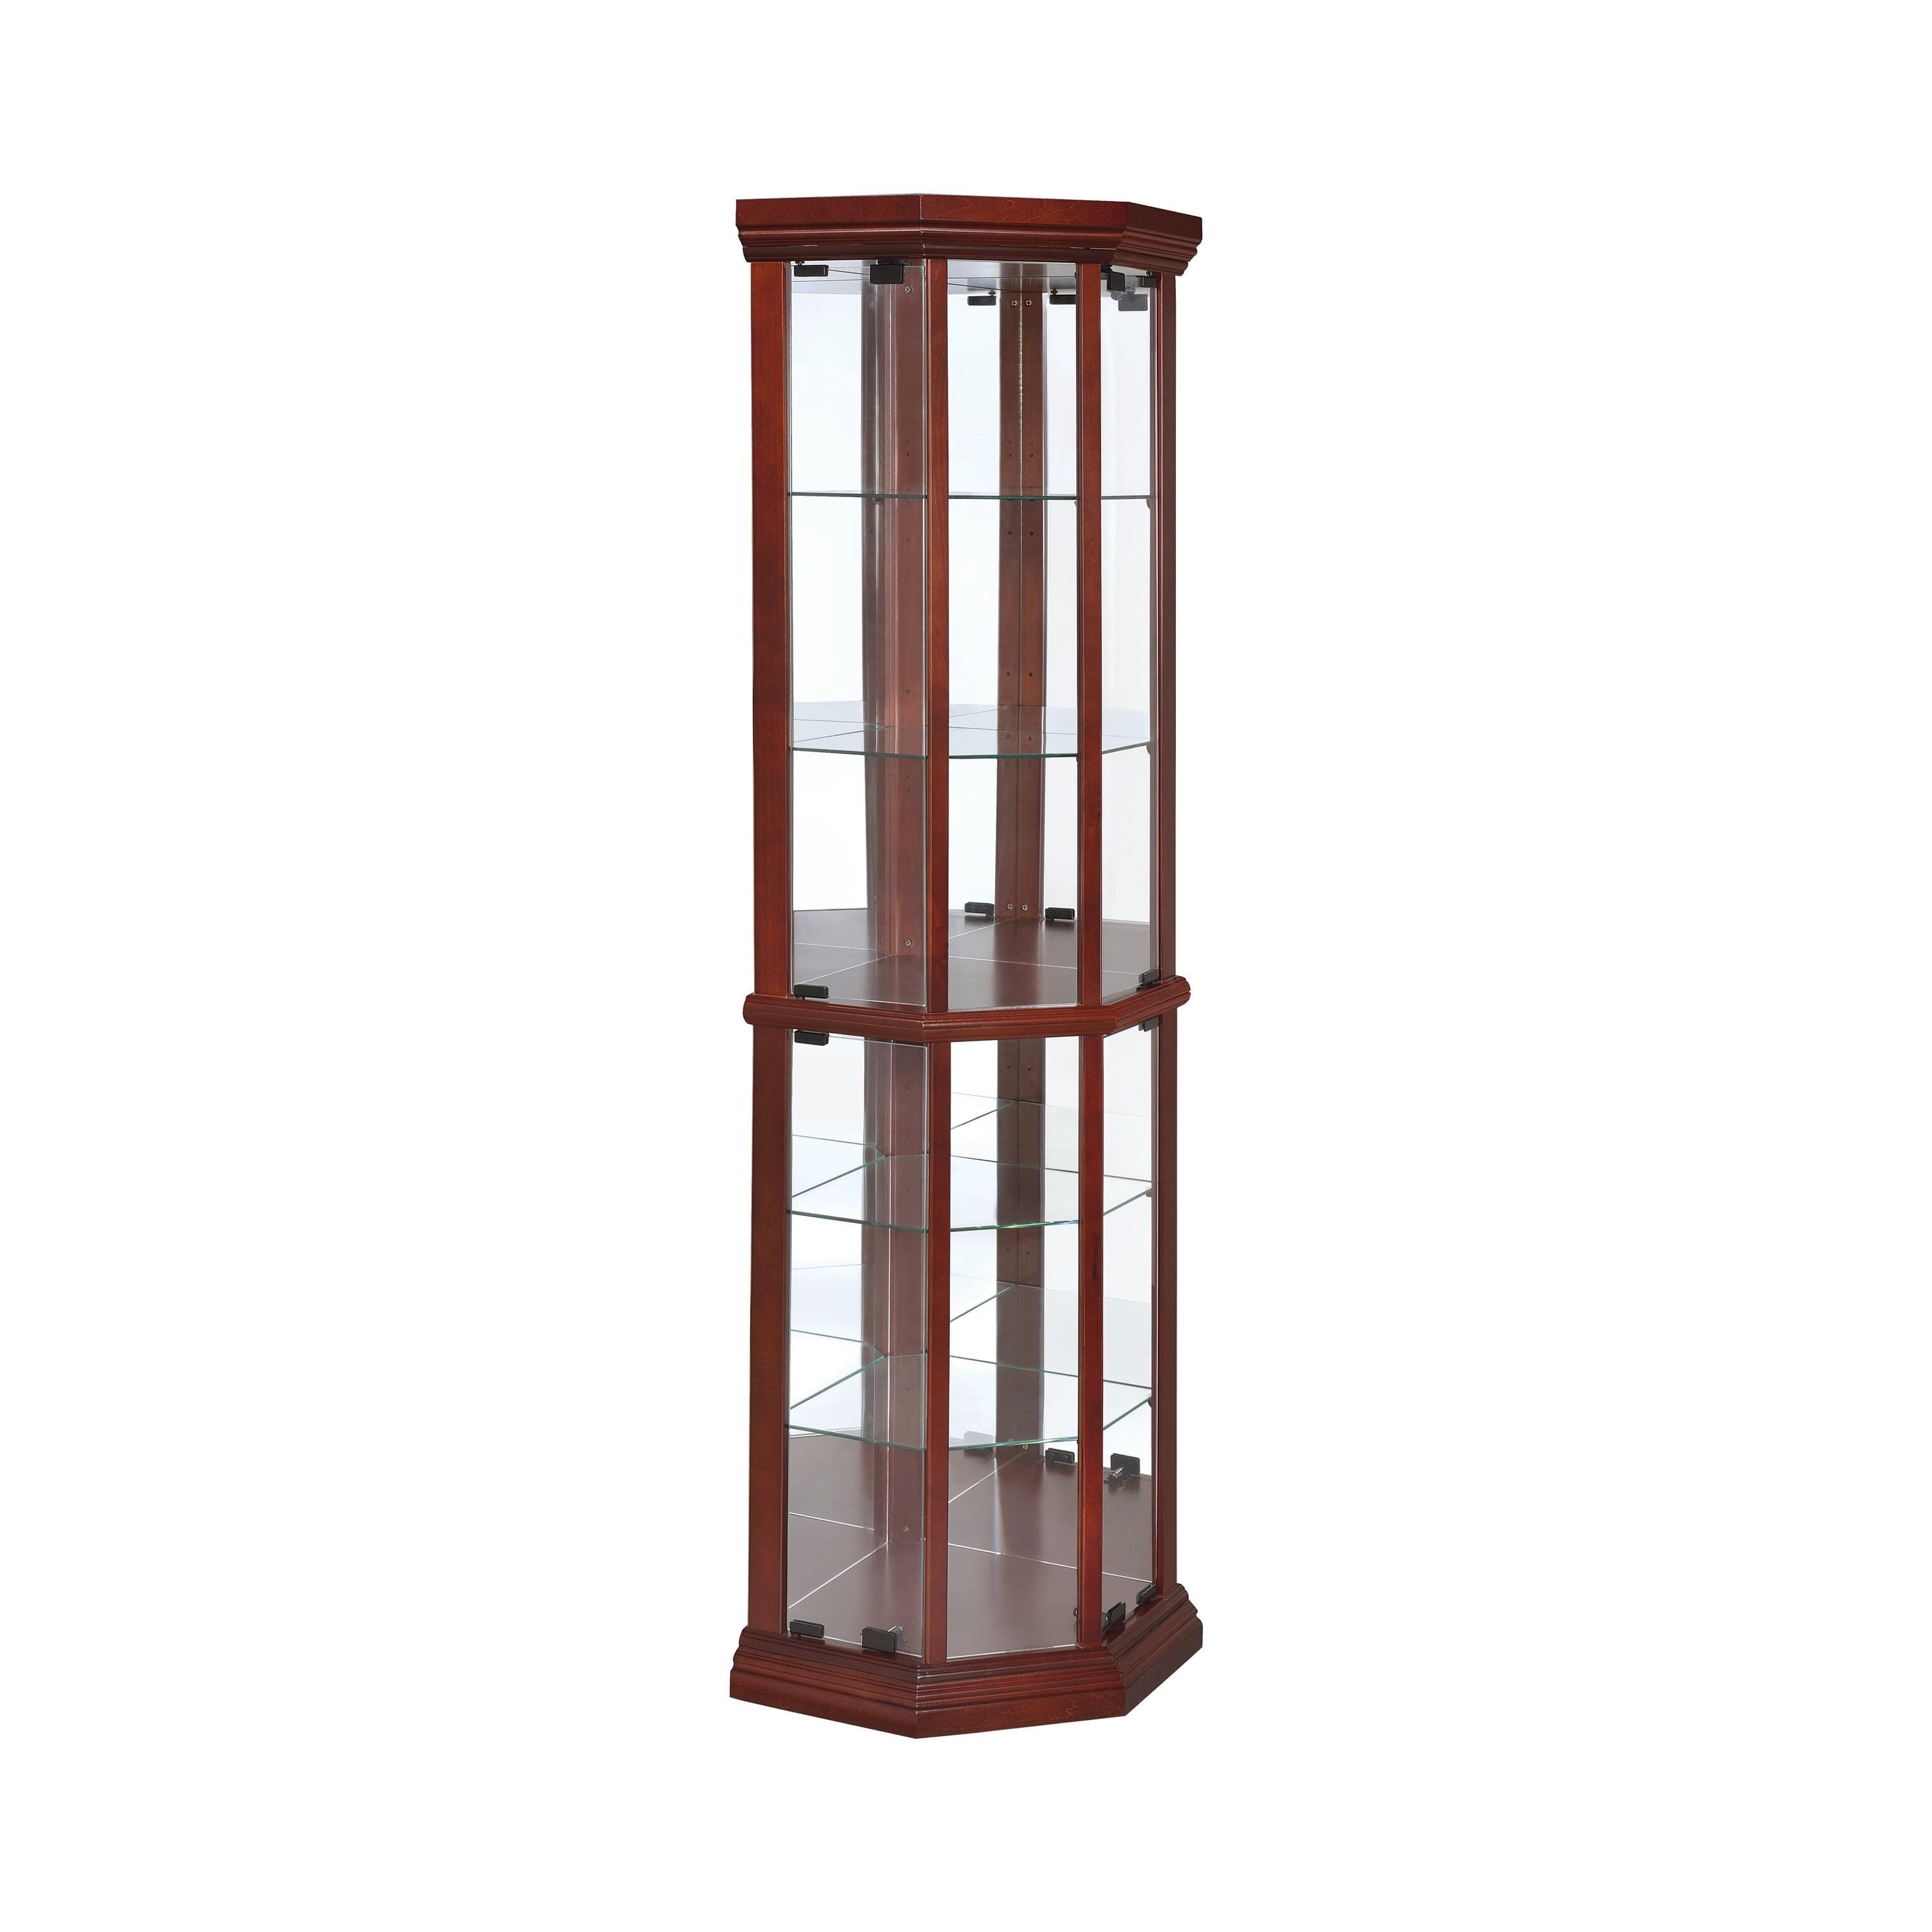 Medium Brown Lighted Corner Curio Cabinet with Glass Shelves